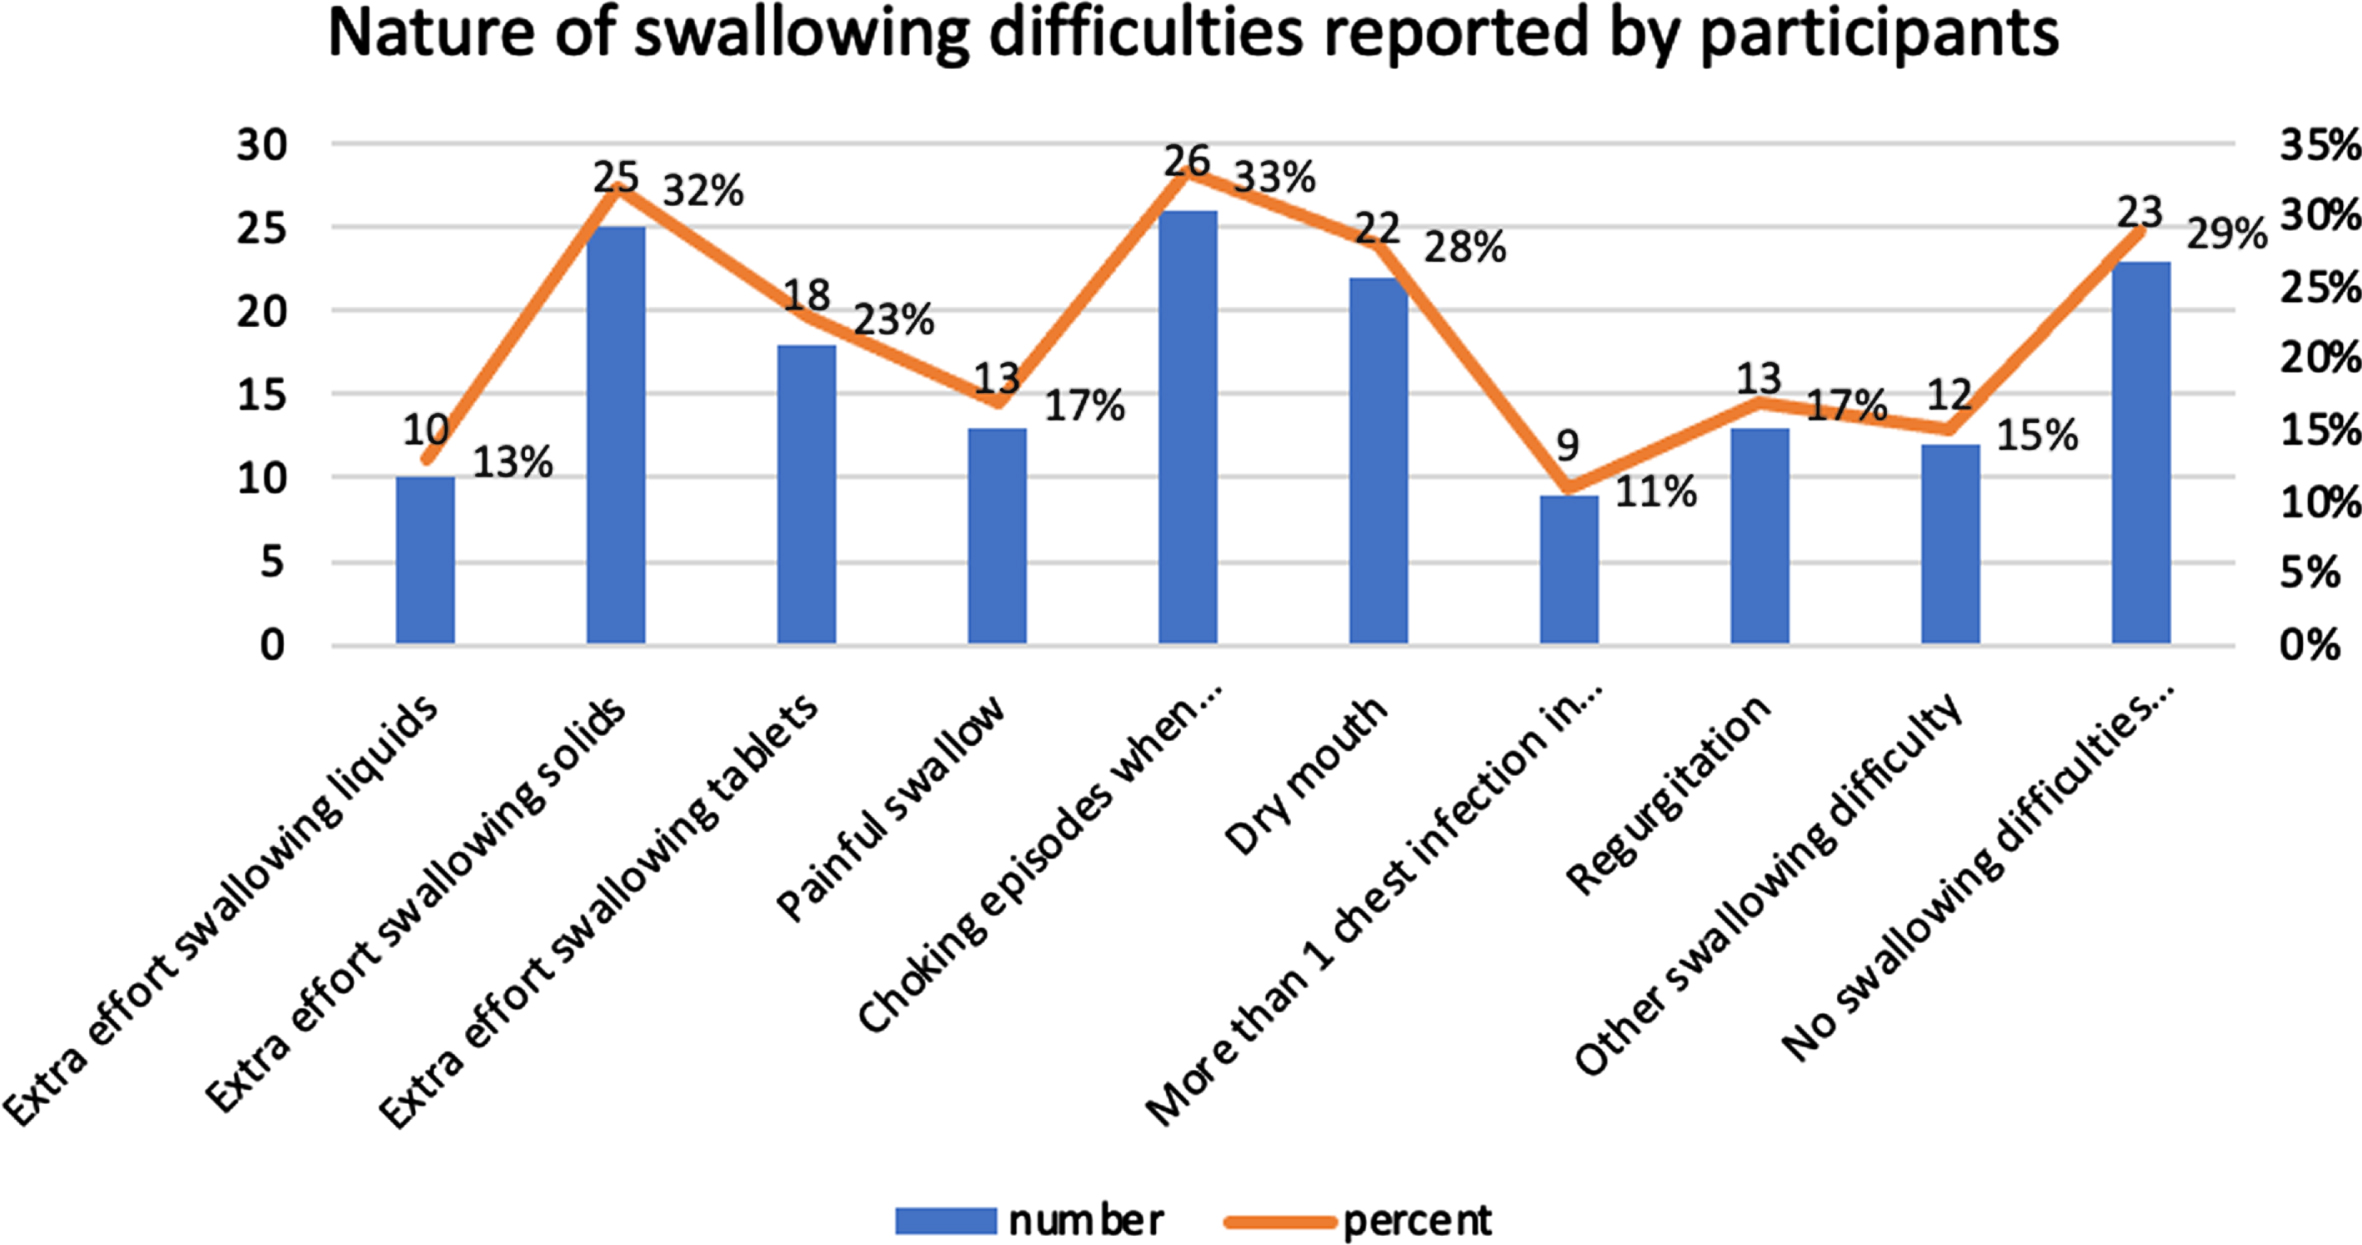 Nature of swallowing difficulties reported by participants.